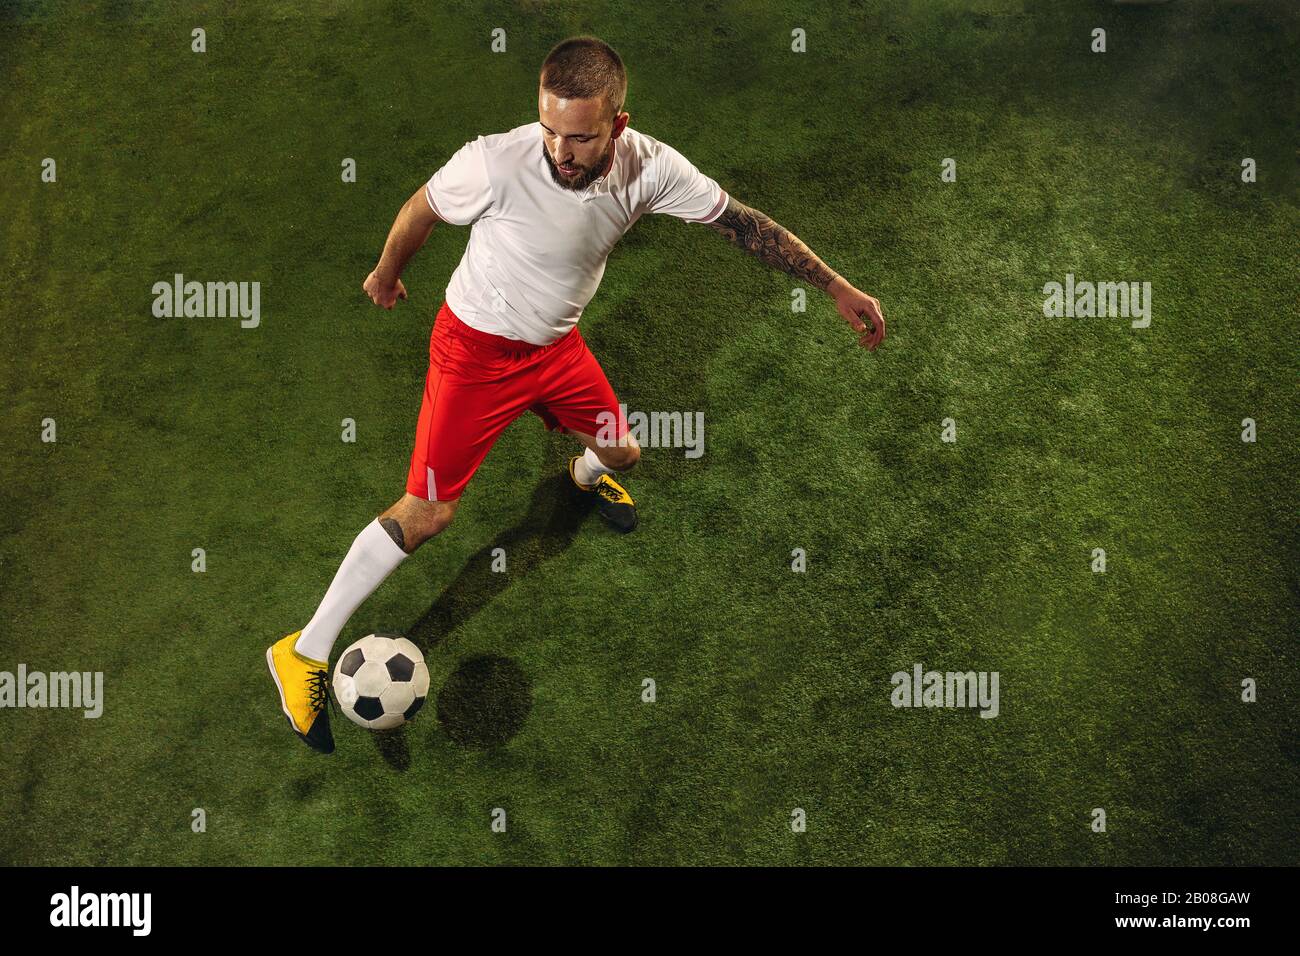 Football Soccer Player is Number One in a Stadium Background Stock